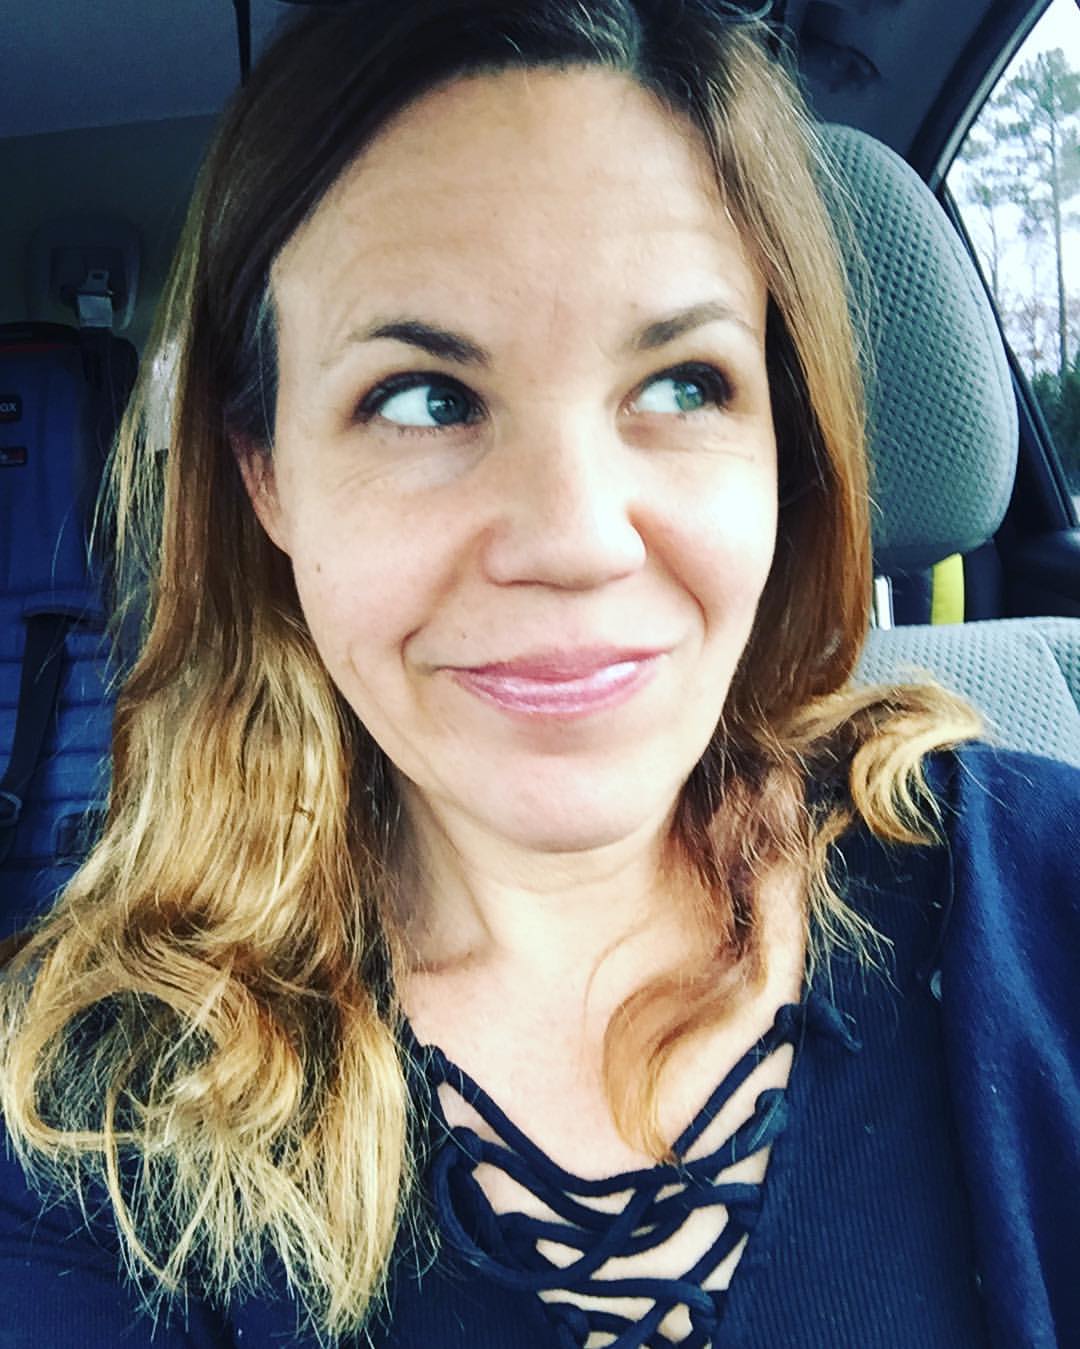 Jen sits in her car with a slight smirk on her face, looking upward thinking. She has golden brown hair with golden with loose waves around her shoulders. She is wearing a dark blue shirt with a criss cross thread design that rests loosely around the neckline.